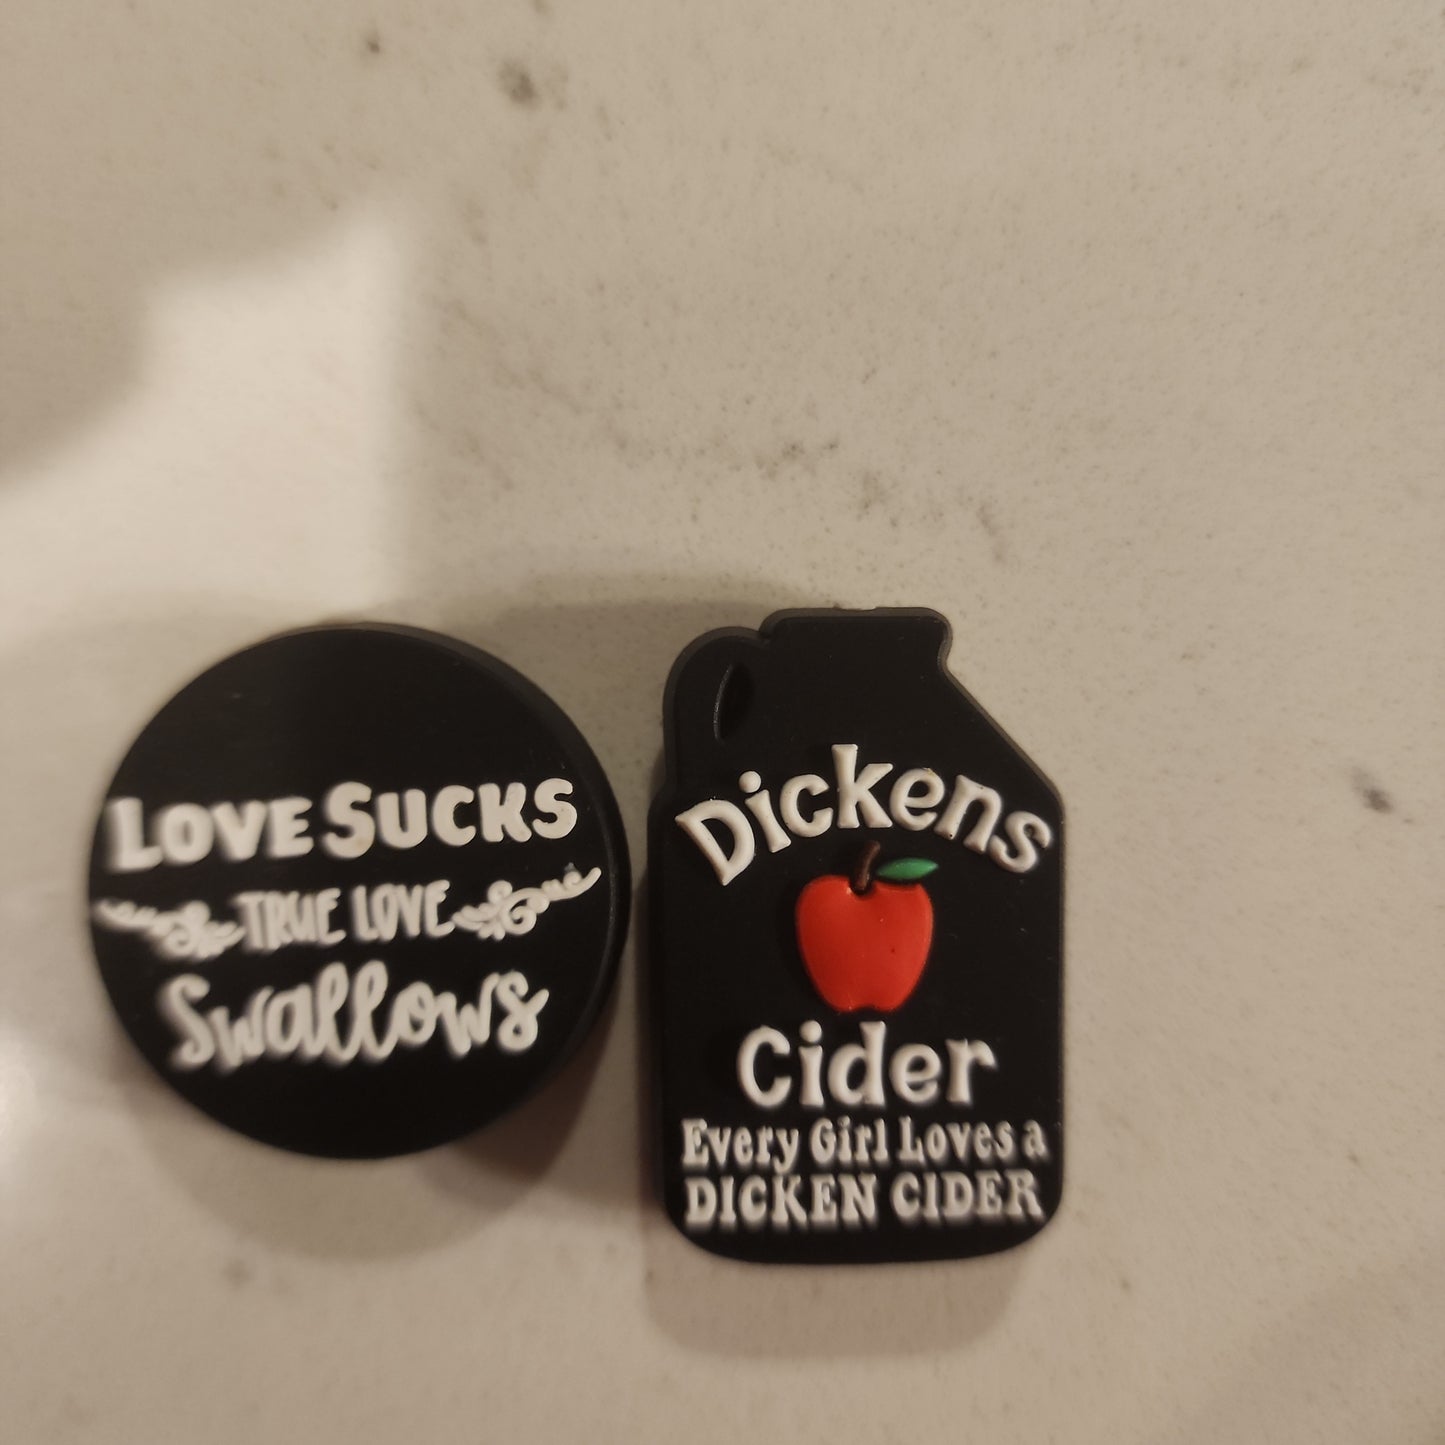 Dickens cider and love sucks copyrighted exclusive silicone beads naughty bead